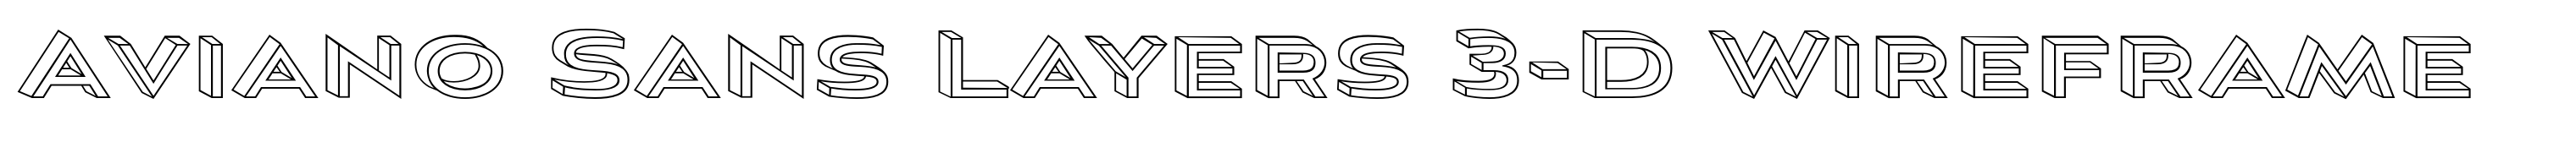 Aviano Sans Layers 3-D Wireframe